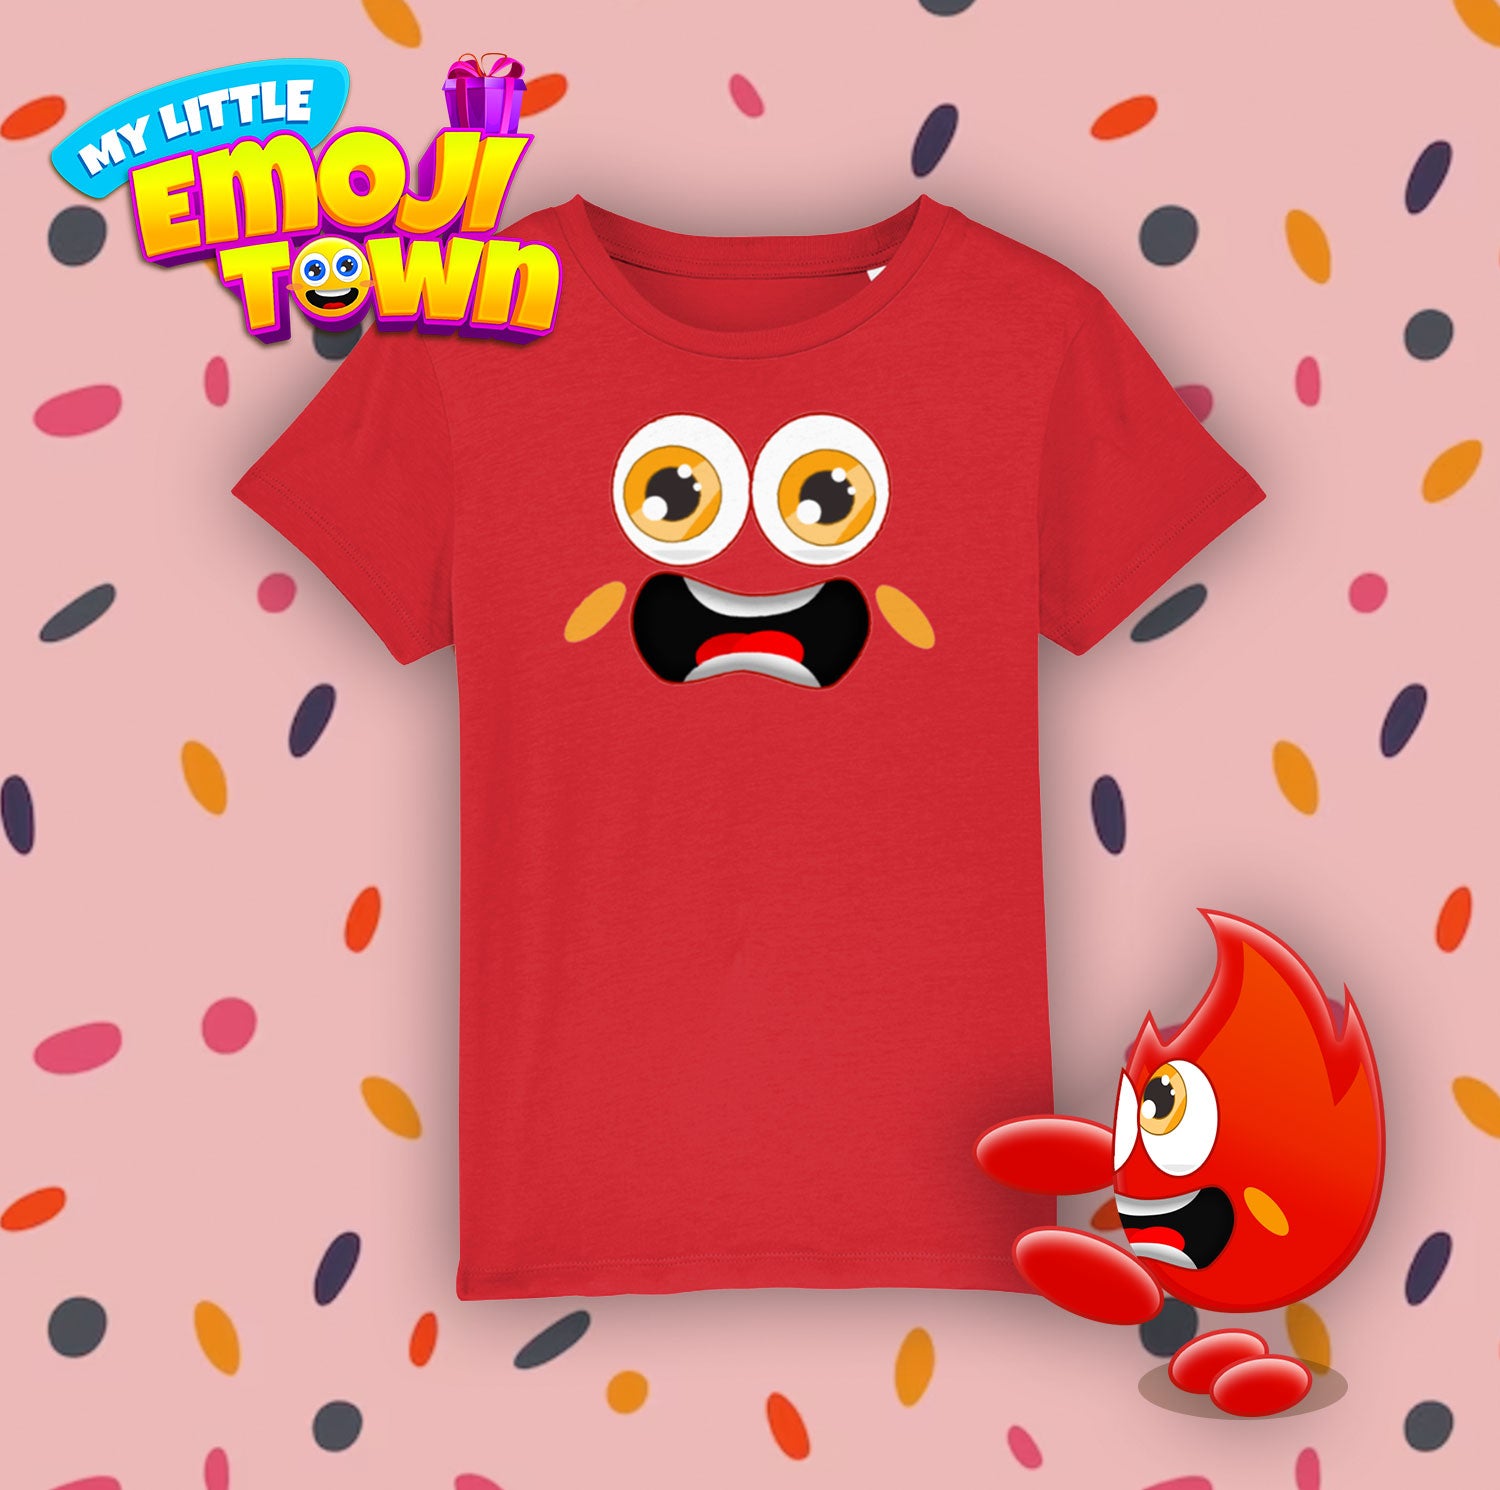 Hot's Fever-Pitch Frenzy Tee!